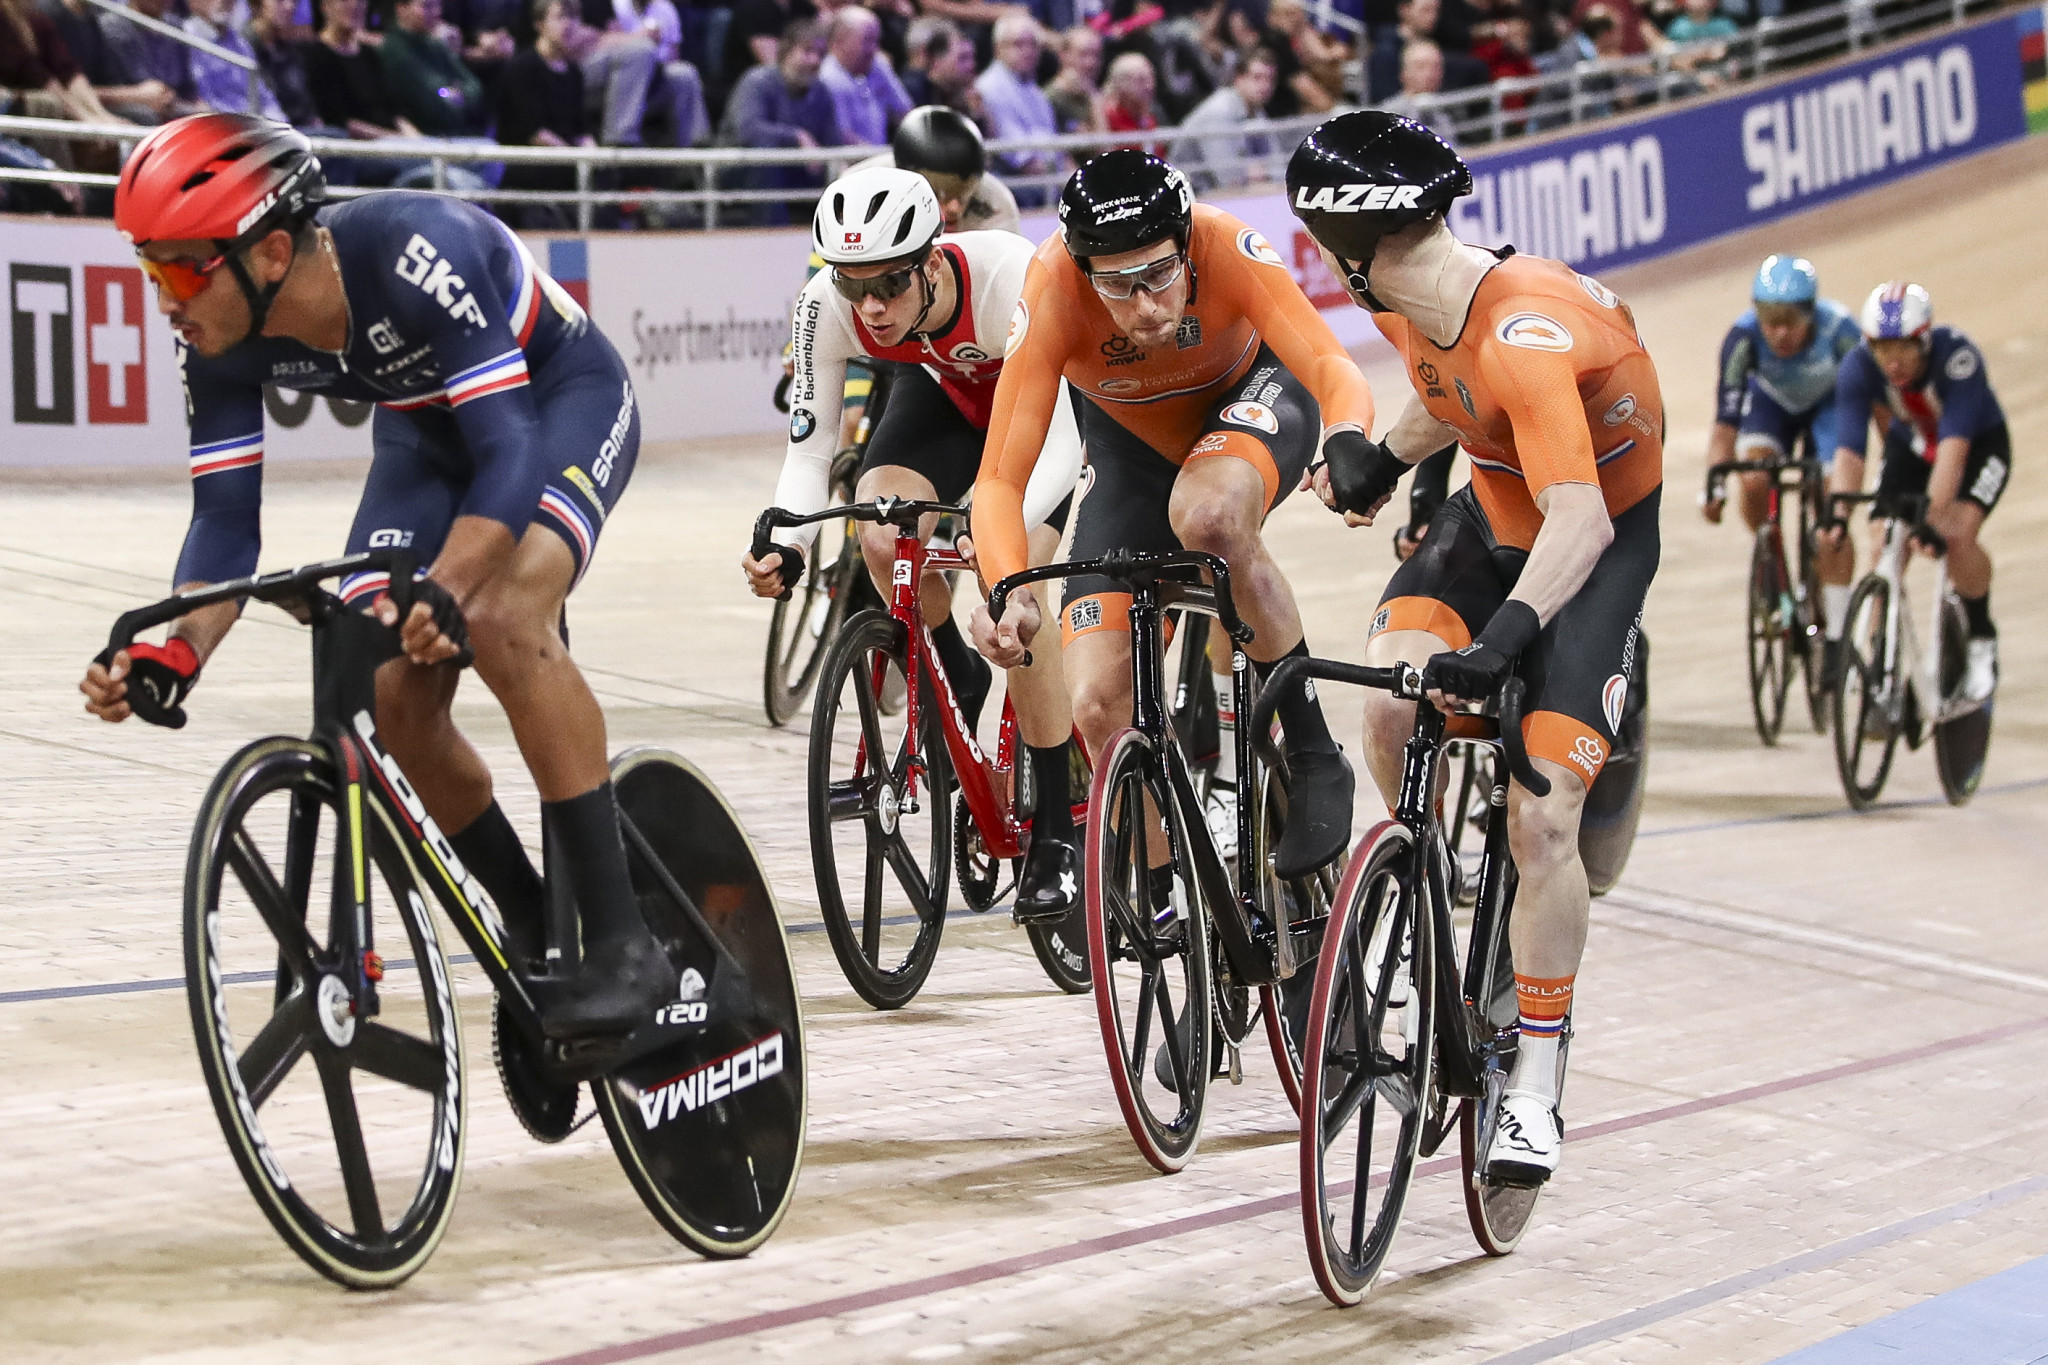 The UCI Track Cycling World Championships are now scheduled to take place in Roubaix this October ©Getty Images